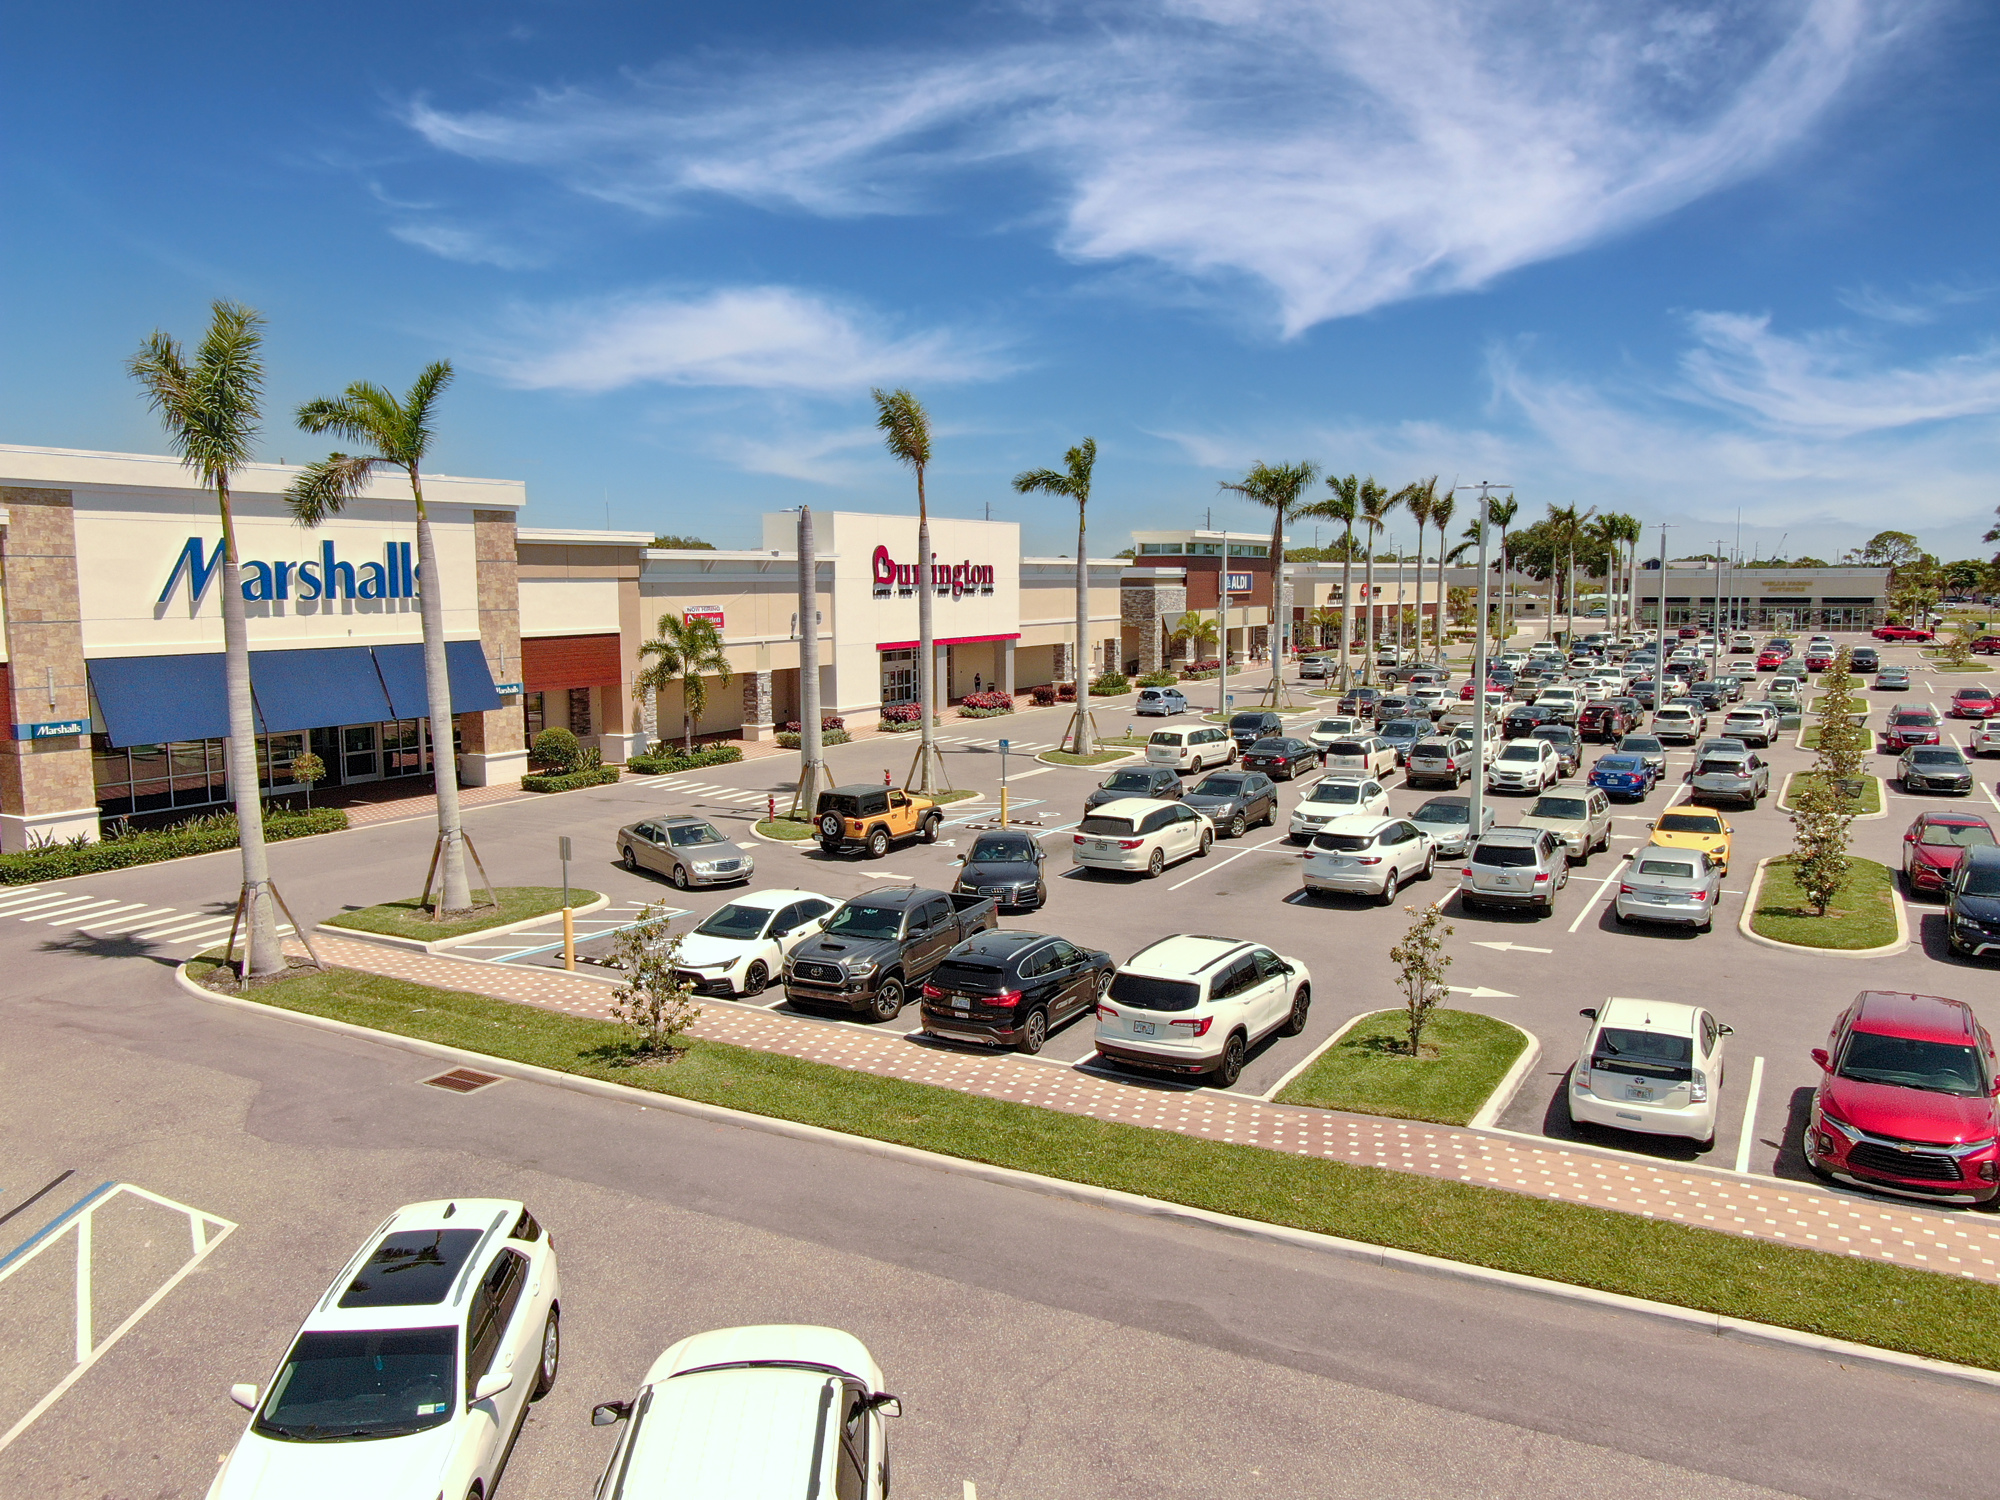 Courtesy. Benderson Development has reimagined Jacaranda Plaza in Venice, which was once home to a K-Mart and a Blockbuster Video.